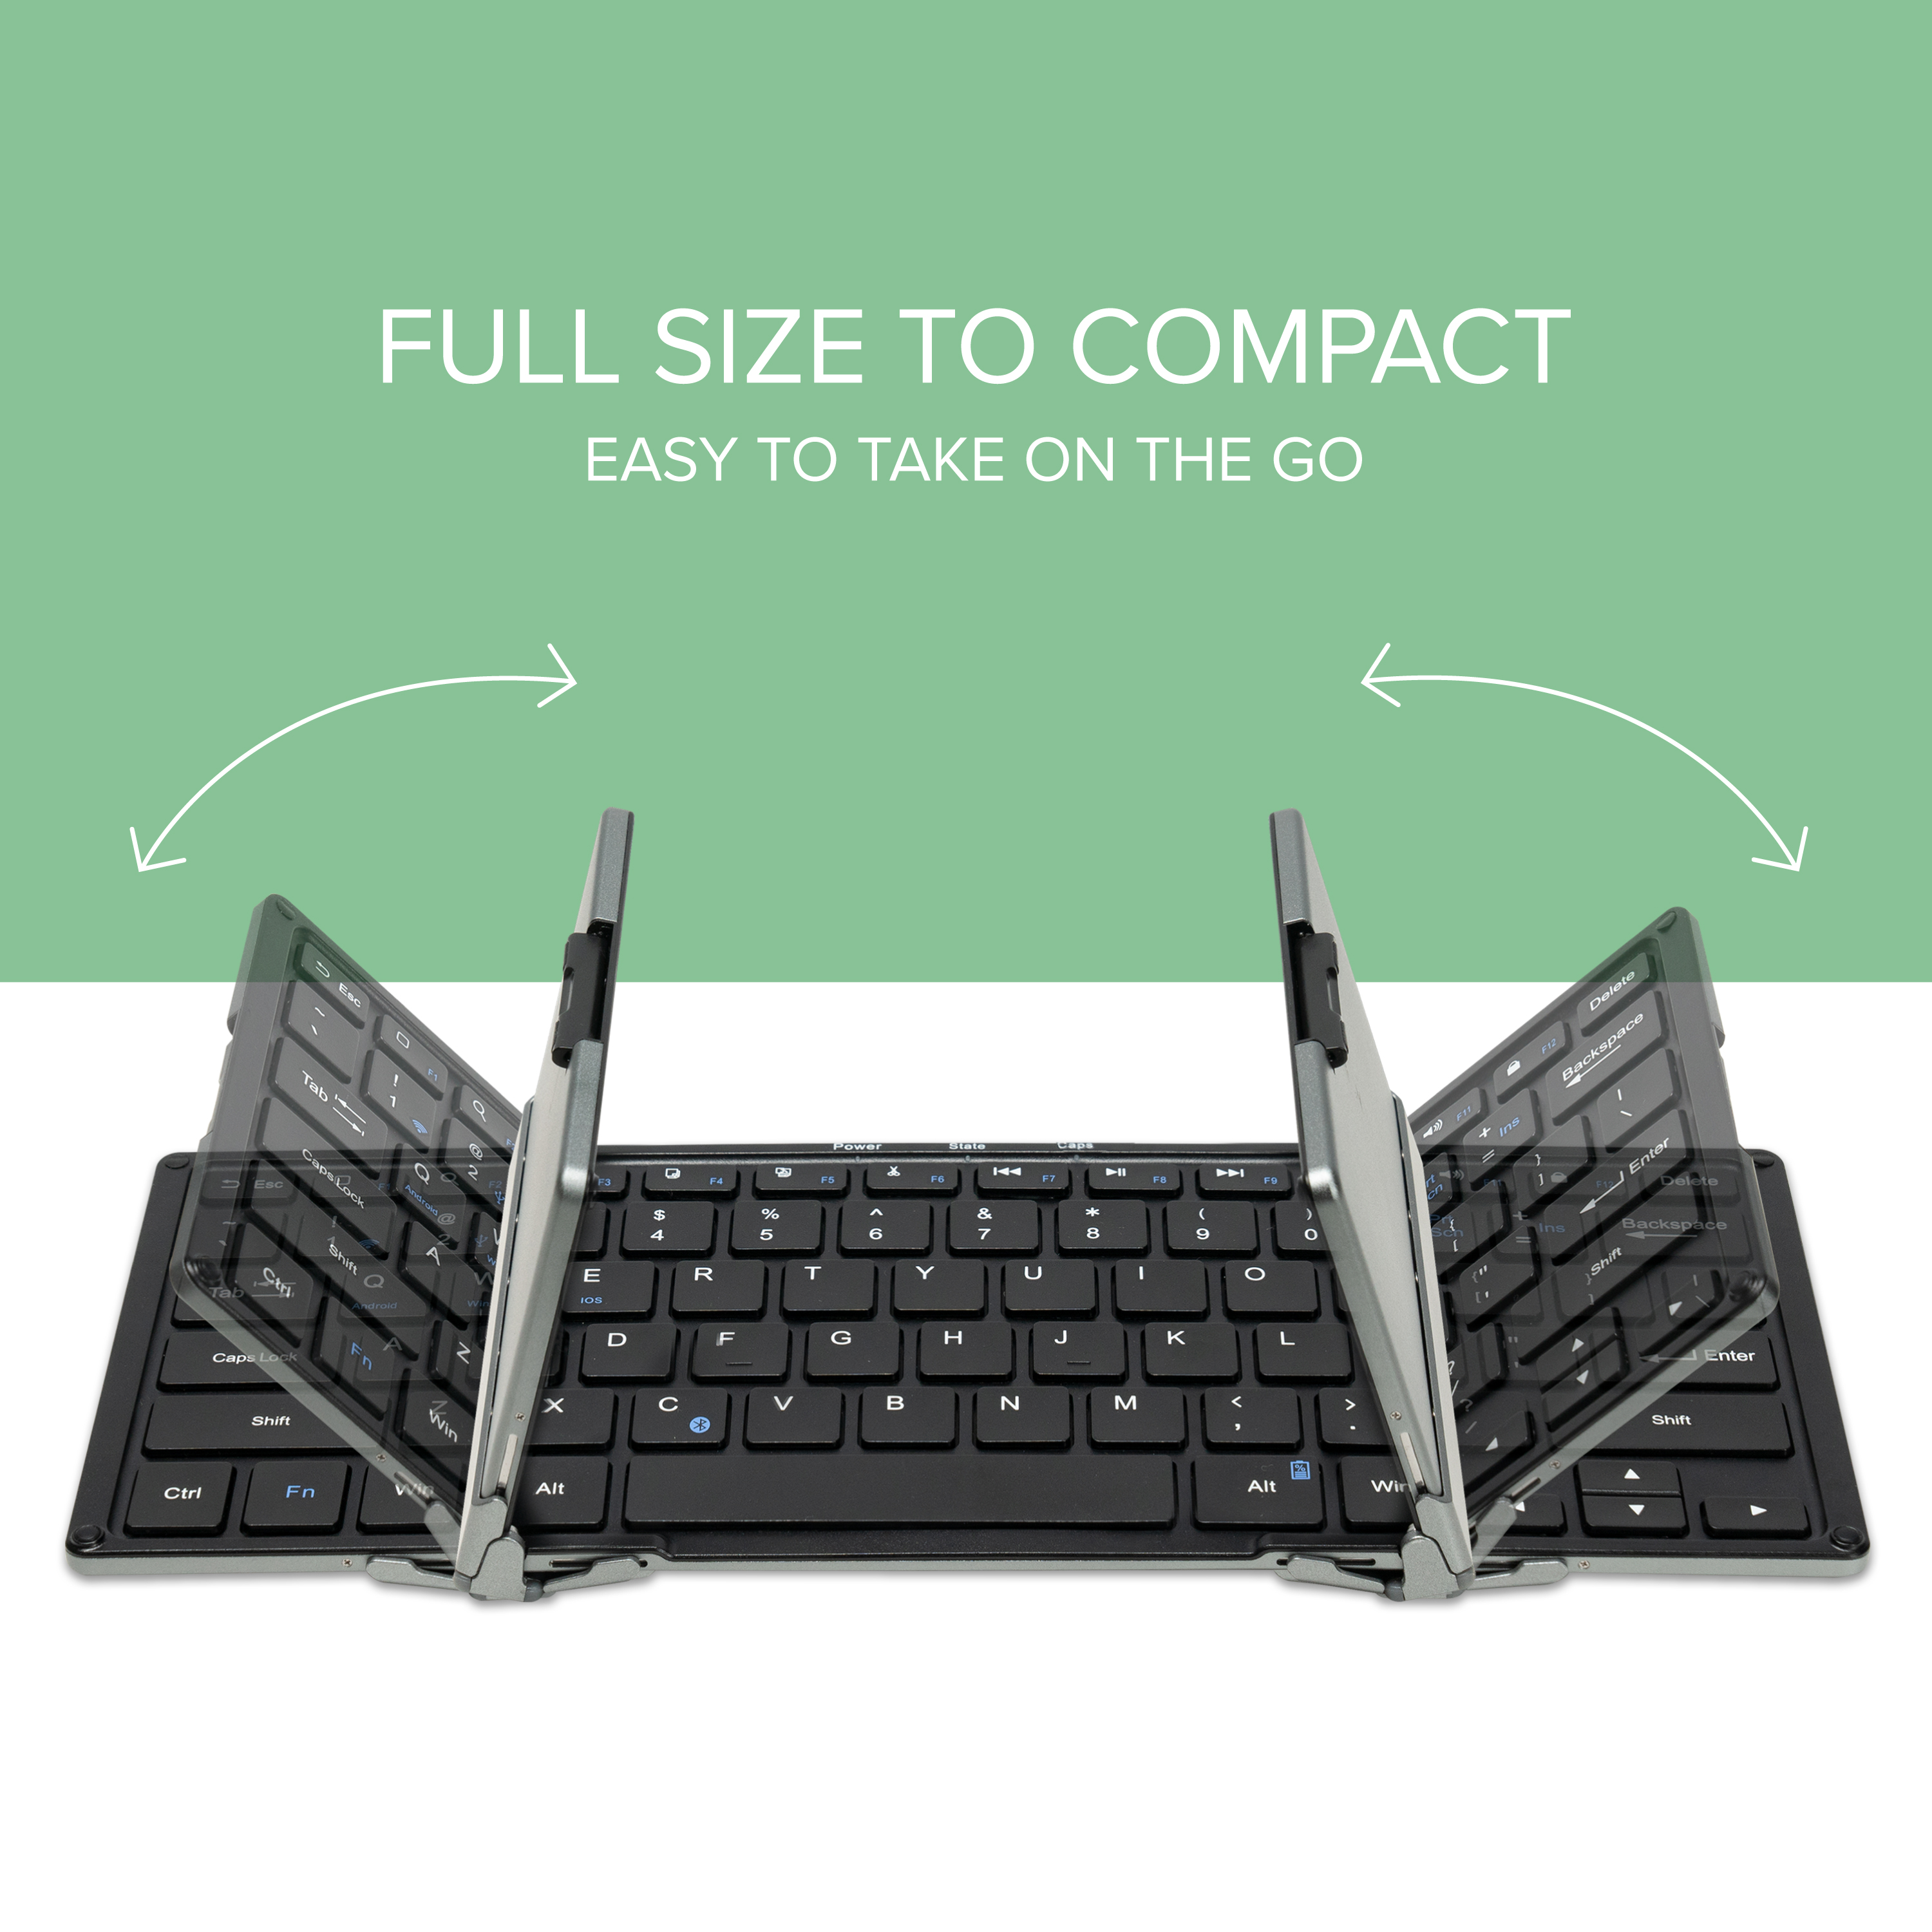 Plugable Foldable Bluetooth Keyboard Compatible with iPad, iPhones, Android, and Windows, Full-Size Multi-Device Keyboard, Wireless and Portable with Included Stand for iPad/iPhone (11.5 inches) - image 4 of 8